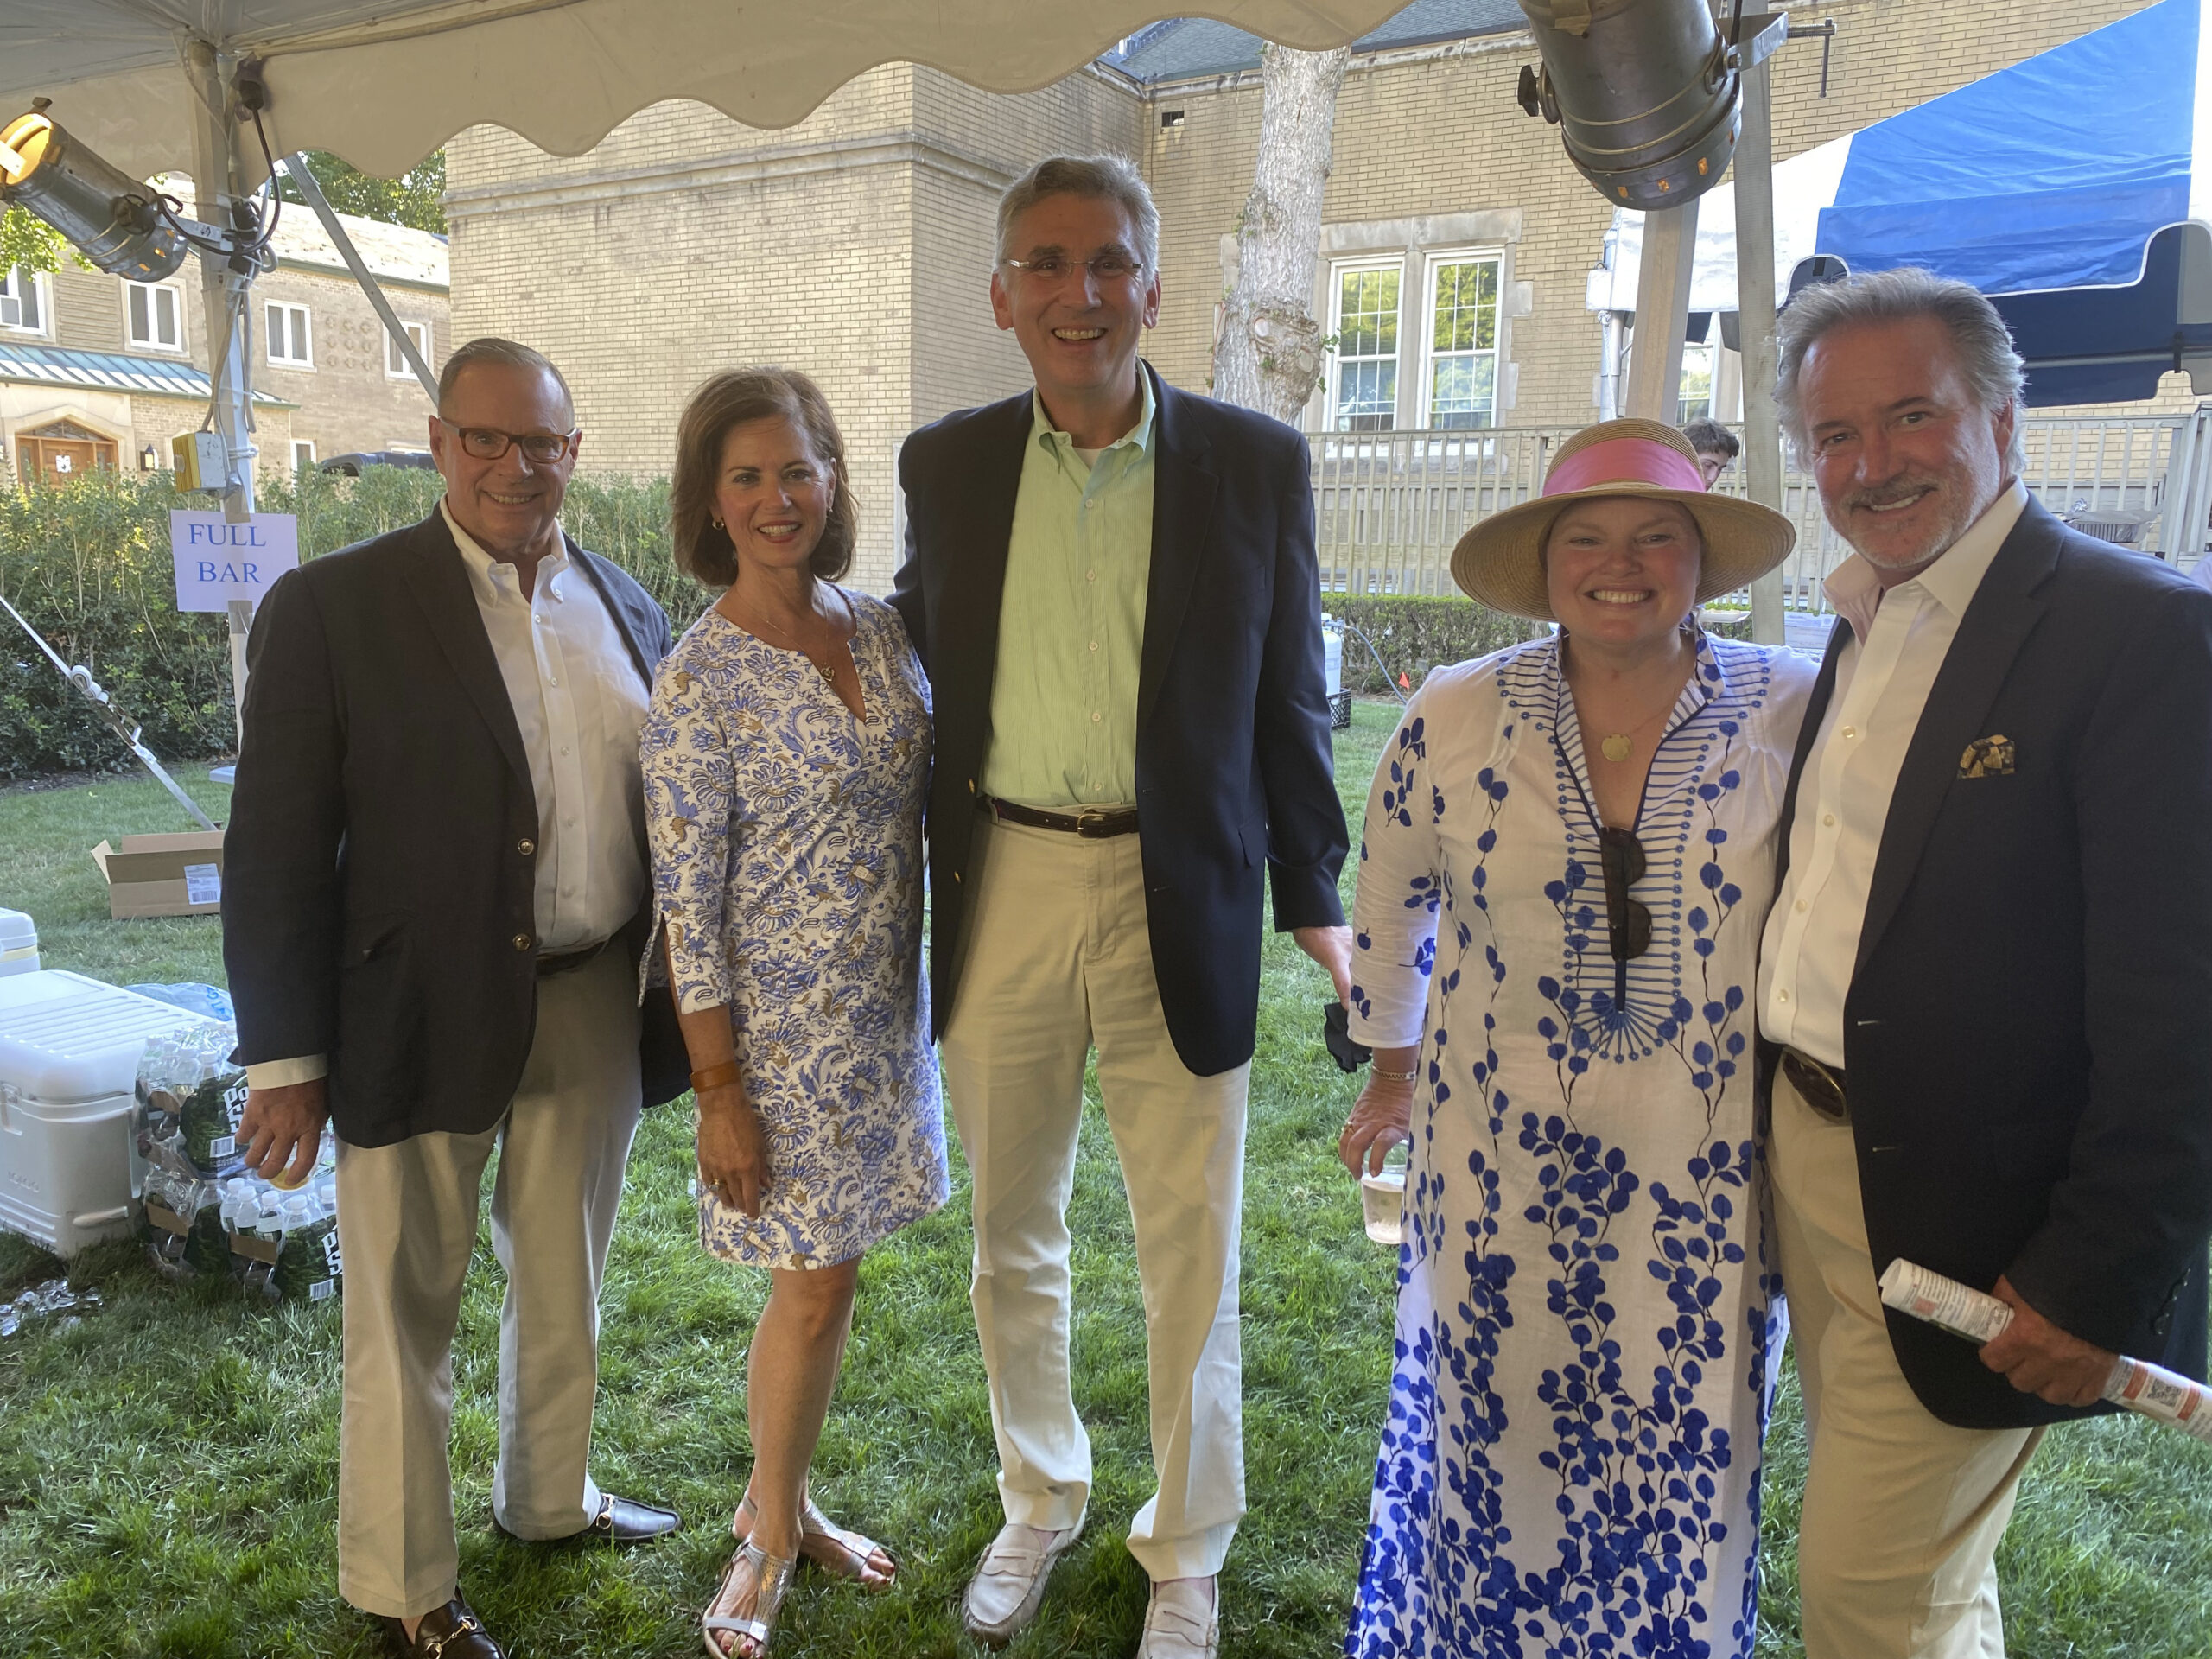 Larry Horton, Gina Arresta, Joe Markovich, Deirdre McDonald and Kevin Maple at the Tent Party for Sacred Heart.  GREG D'ELIA